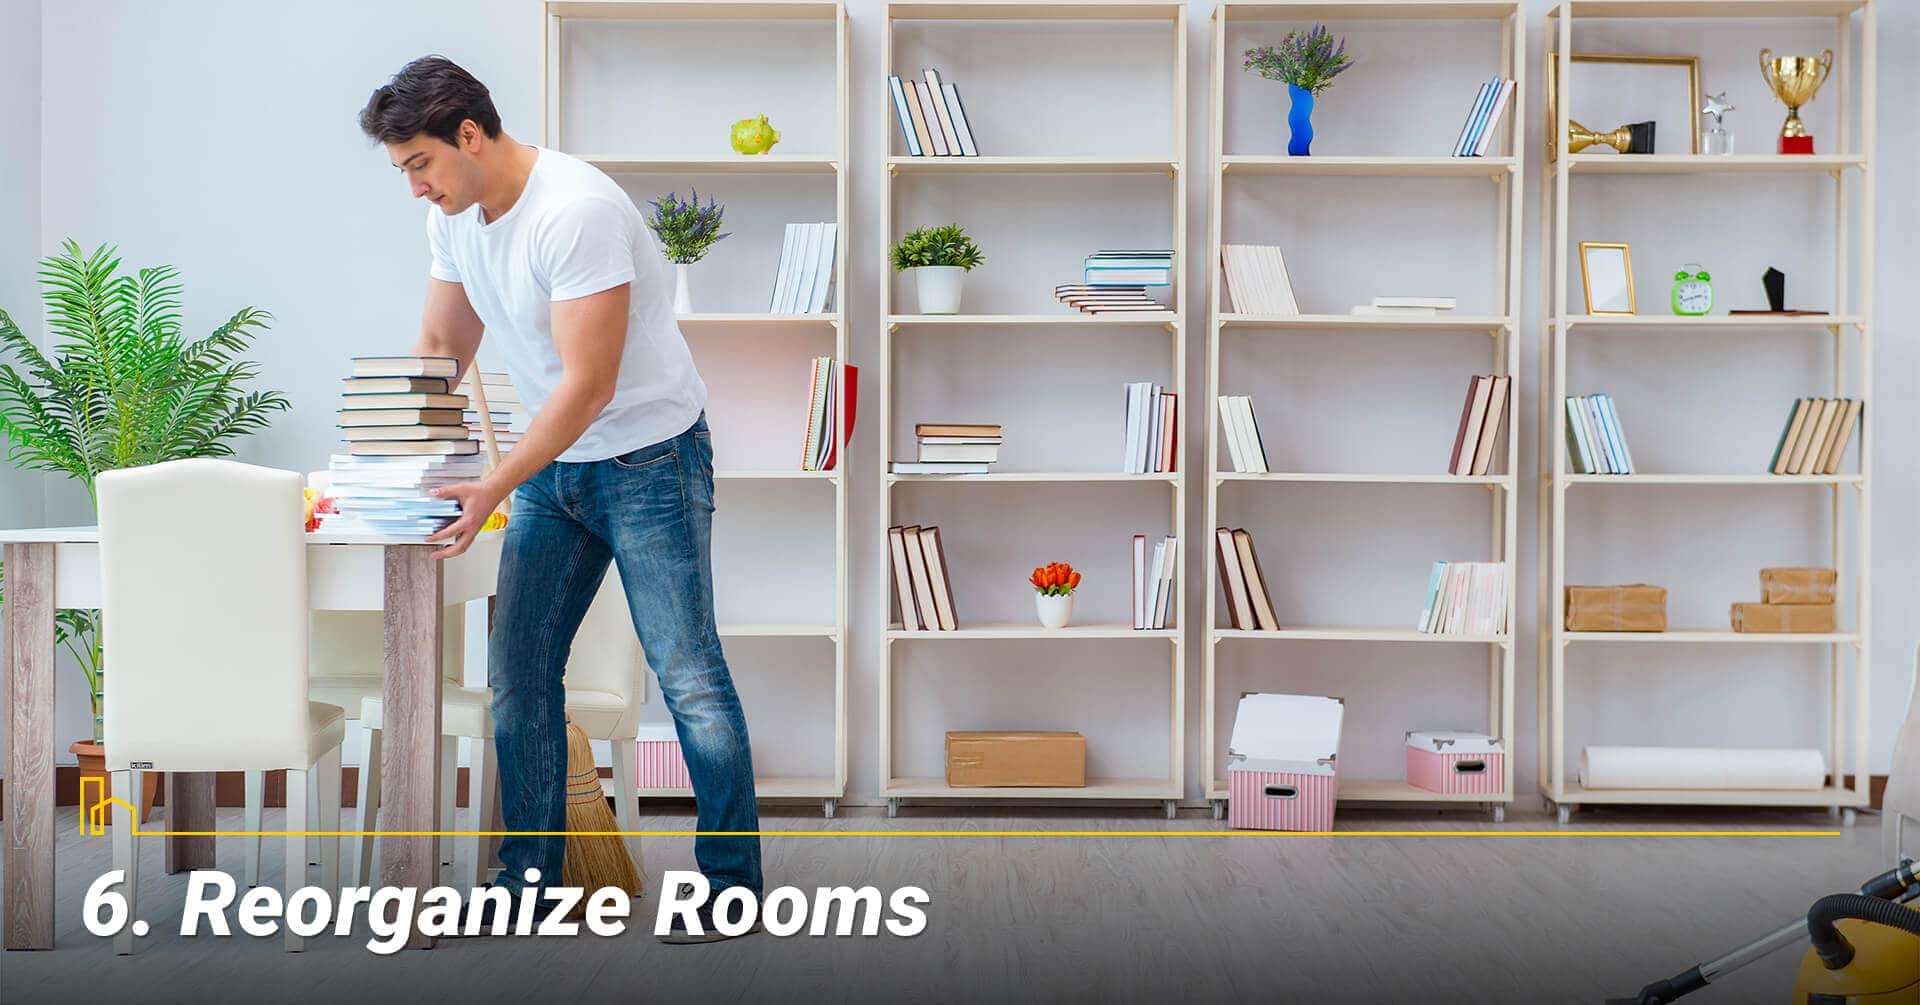 Reorganize Rooms, keep your rooms clean